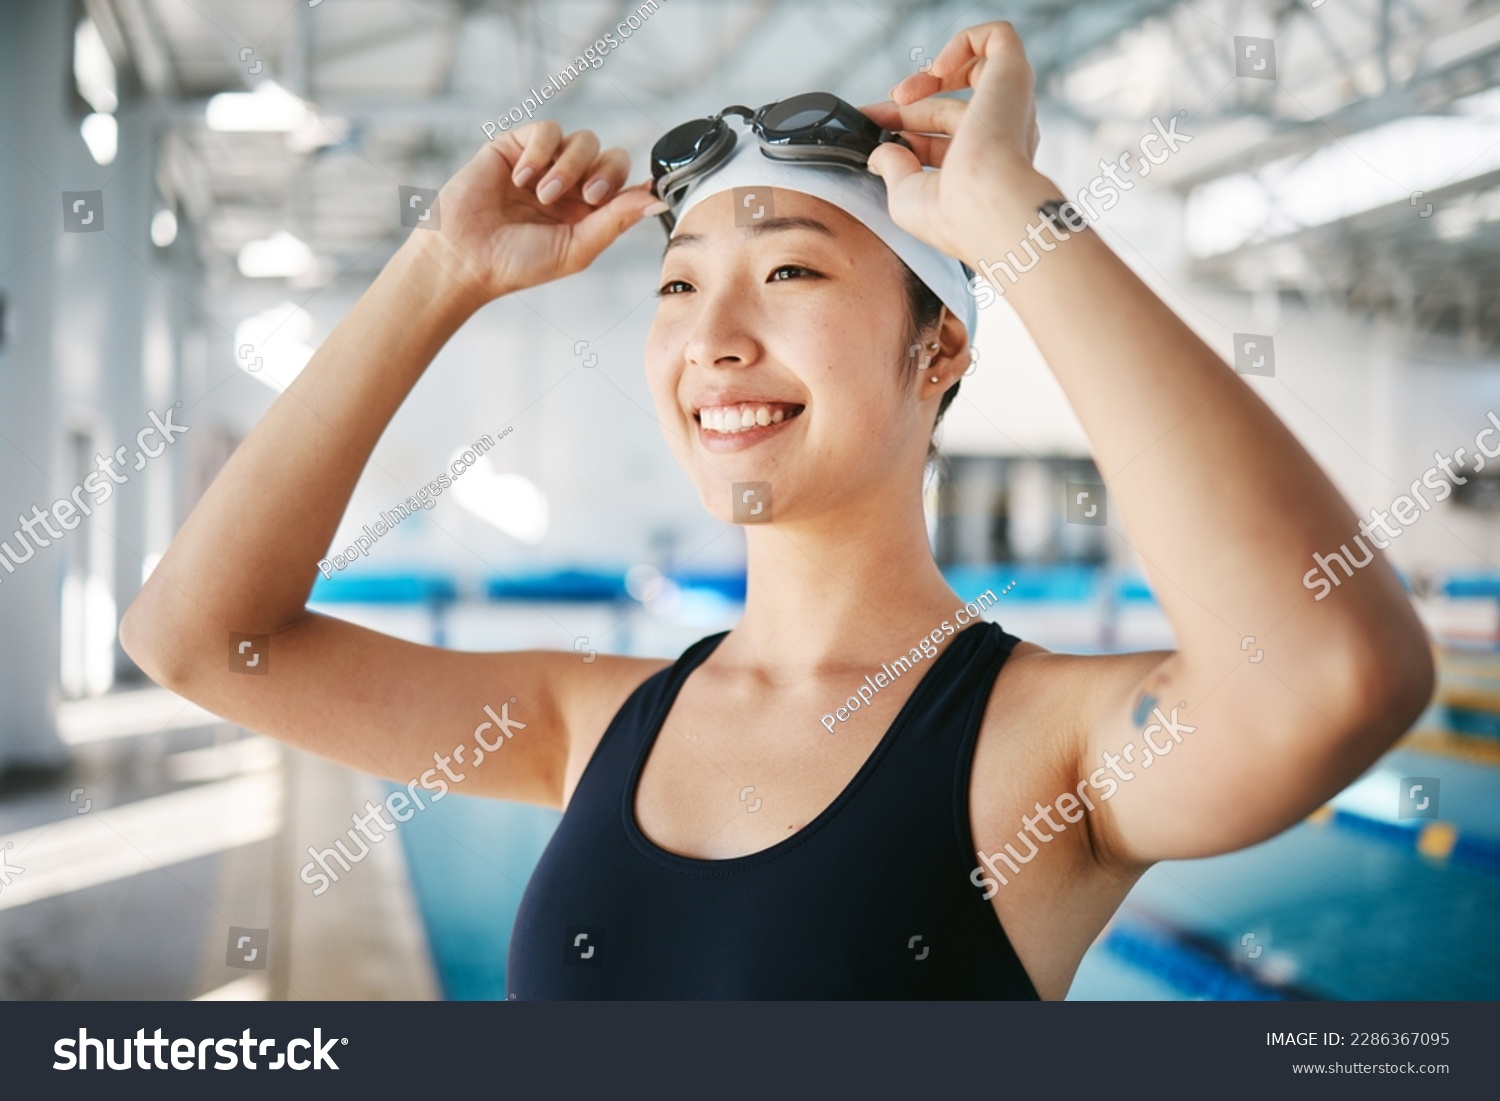 Professional swimming, asian woman with smile and goggles at pool for training, wellness and winner mindset. Water sports, workout and champion athlete swimmer at competition with smile and happiness #2286367095